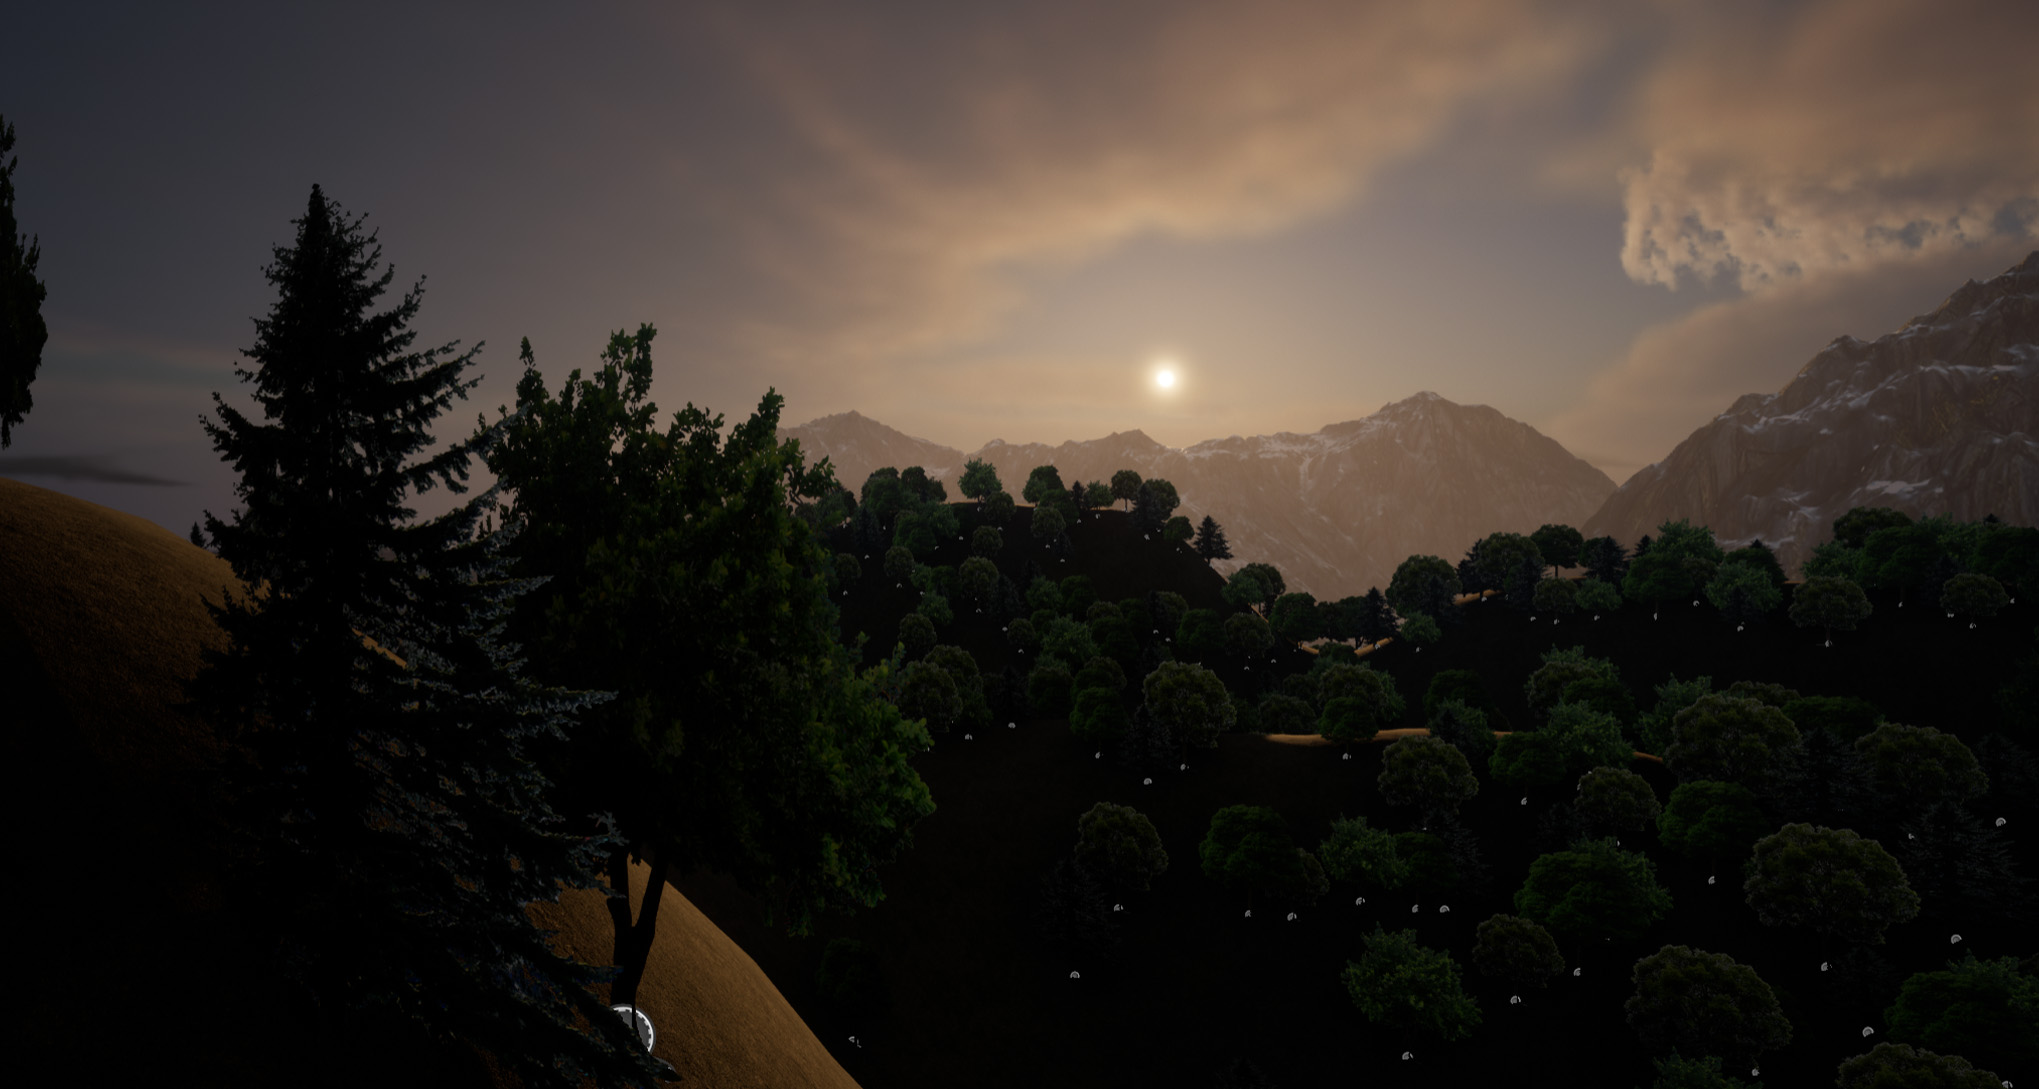 Perspective 2 of an environment created in the Unreal Engine